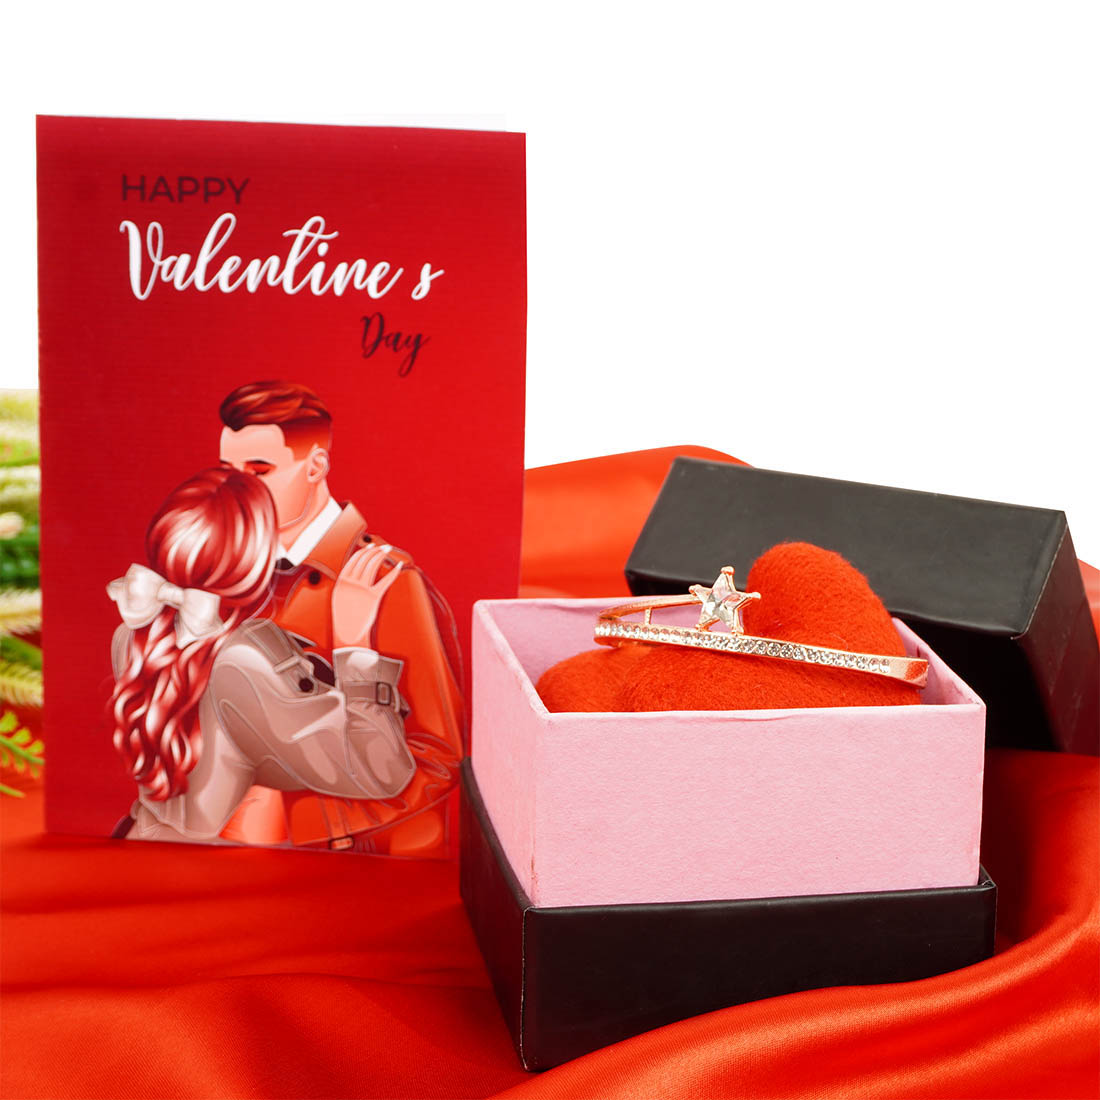 Buy Apple Gifts Gallery Presents Marriage Gifts for Couple,Valentine Gift,Engagement  Gifts for Couple, Figurine for Home Decor,Couple Showpiece,New Marriage  Couple Plastic Showpiece, Silver Online at Low Prices in India - Amazon.in